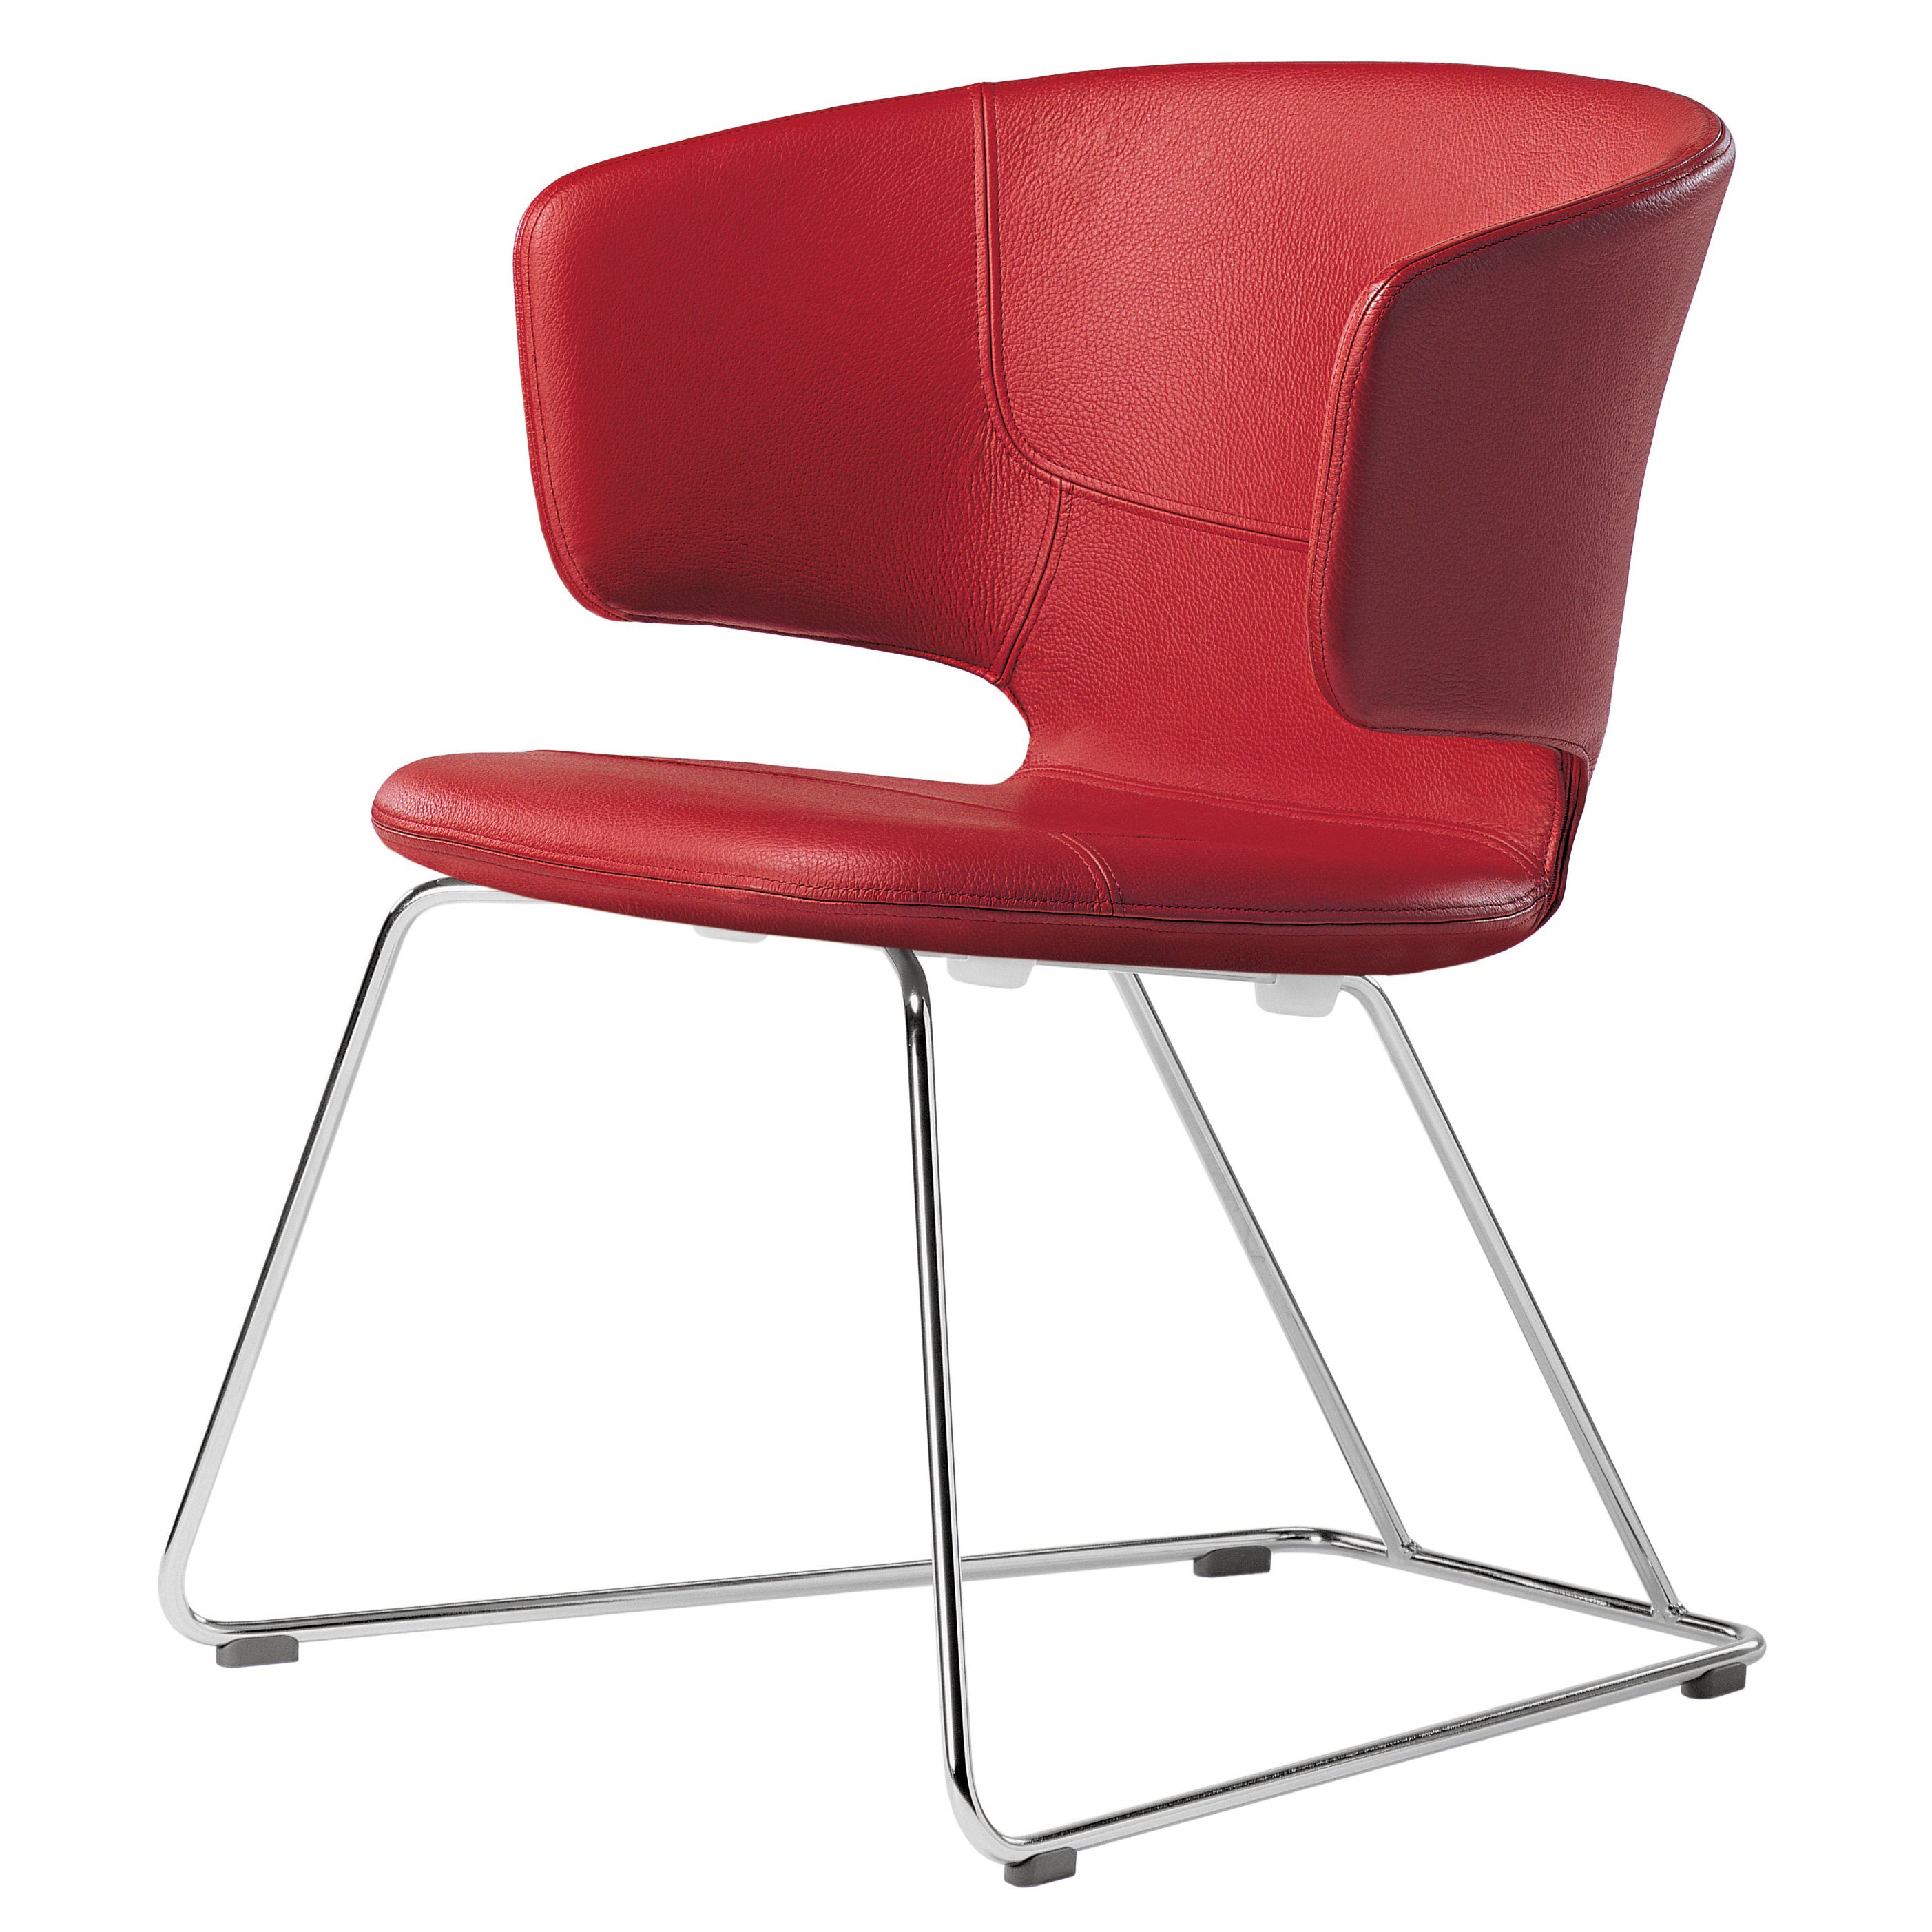 Alias 504 Taormina Sledge Chair in Red Leather and Chromed Steel Frame For Sale